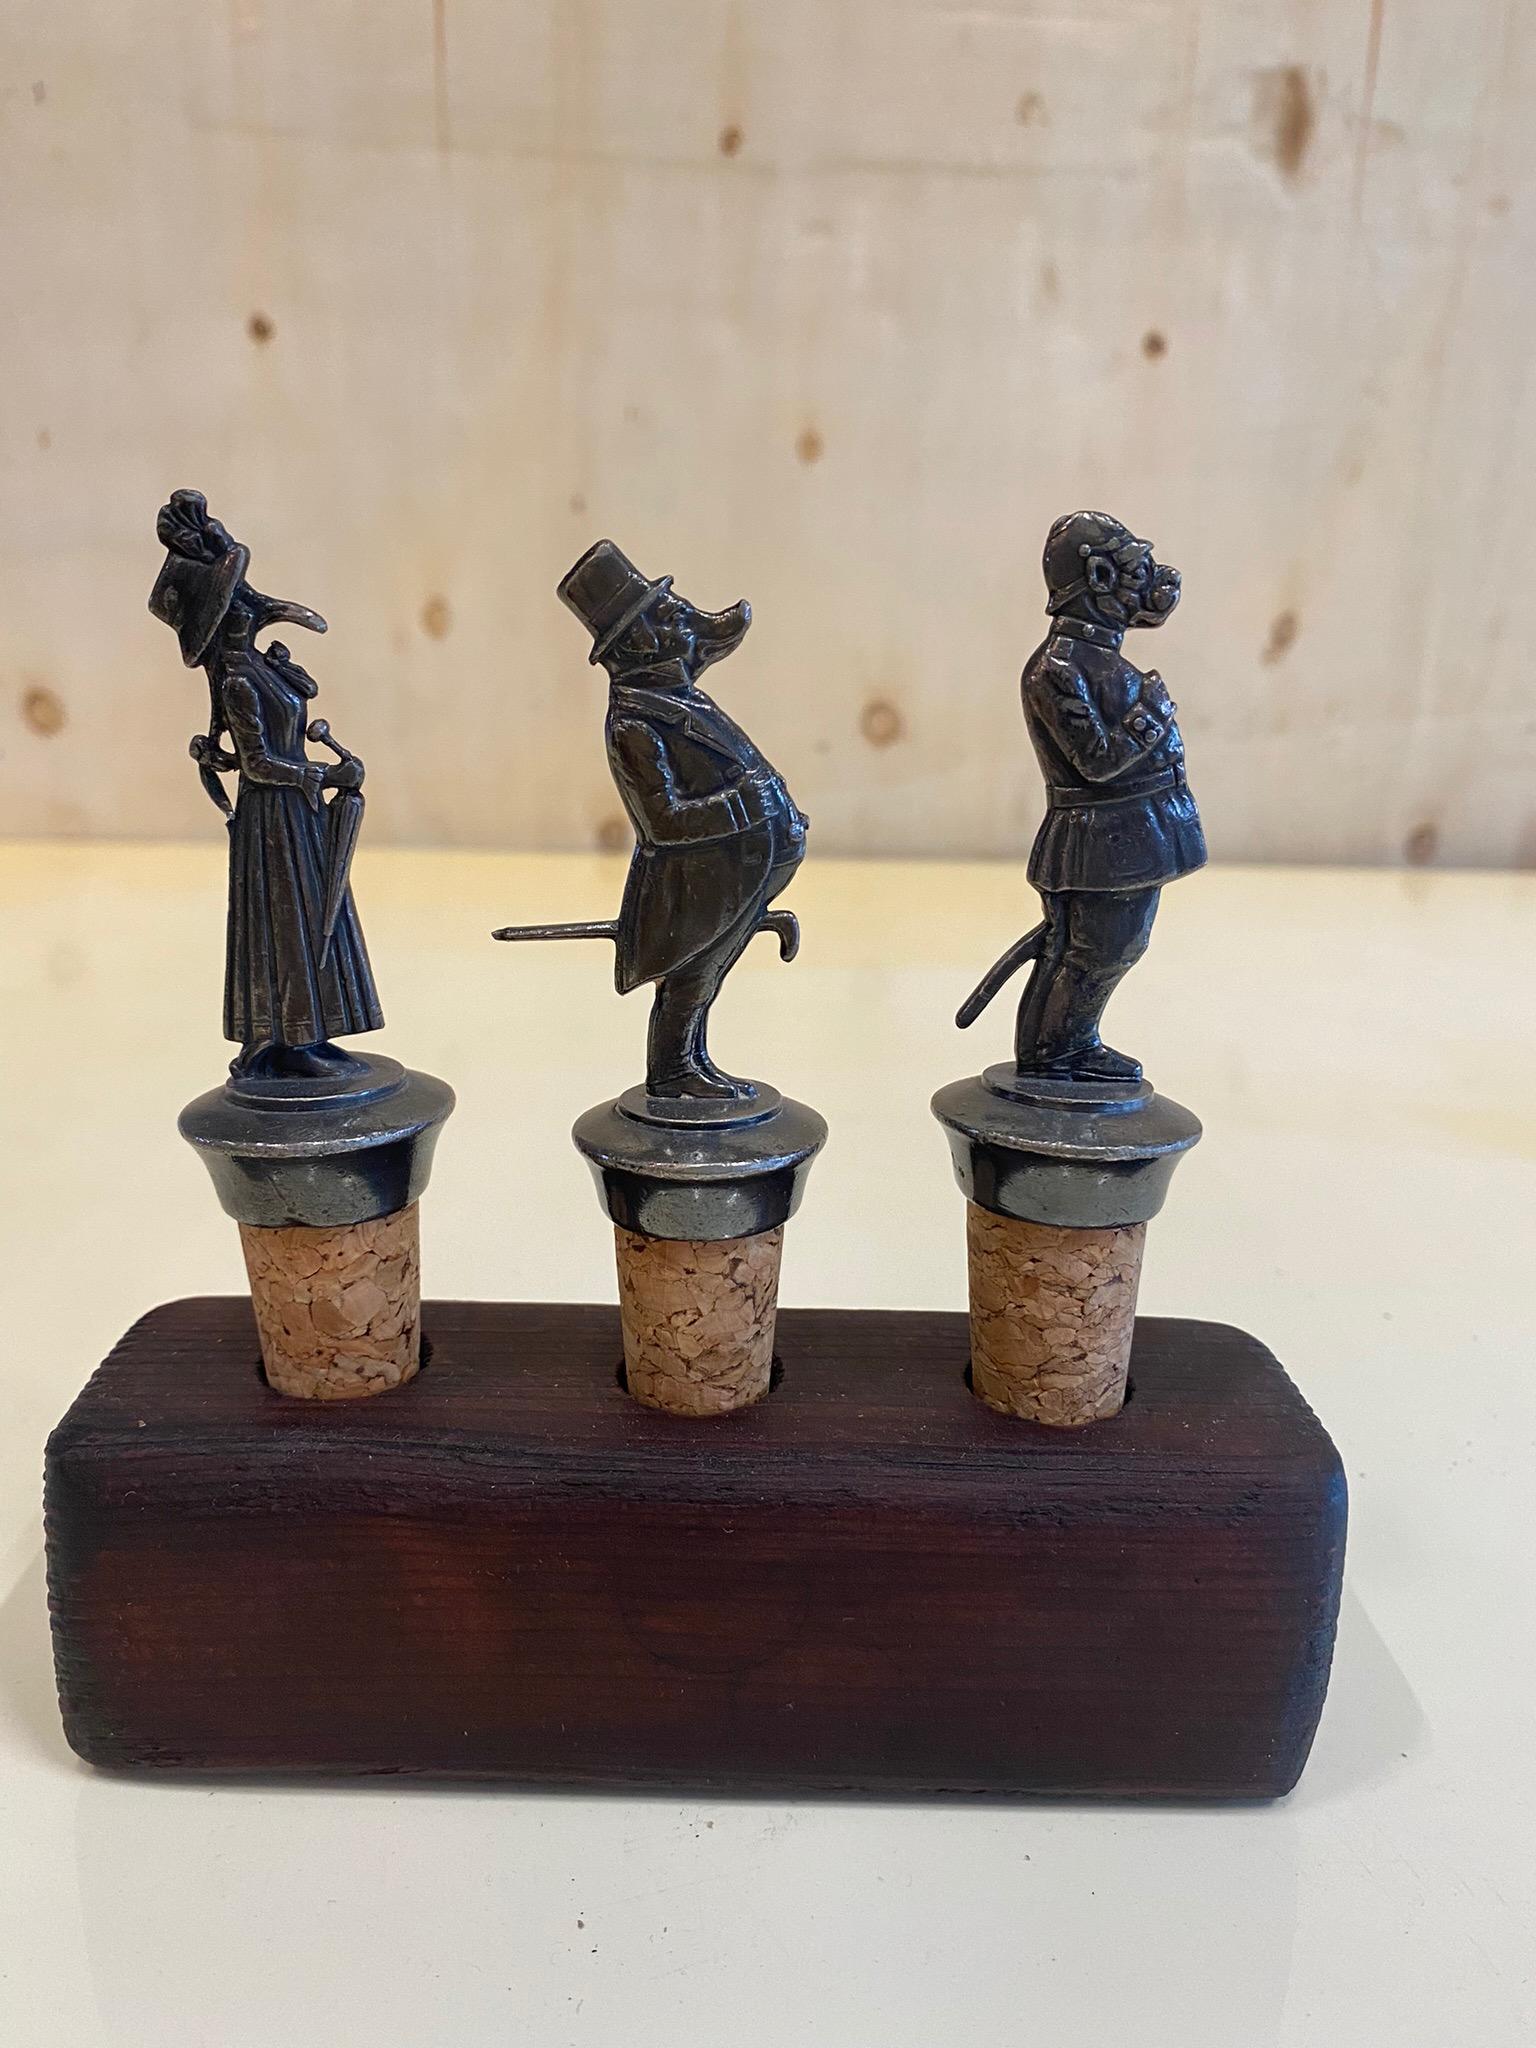 Set of 3 antique art nouveau decorative corks by WMF from around 1910/1920 on a stand made of wood. The 3 bottle caps are made of metal and cork. They are 3 different figures. A bird lady dressed in a swing dress with hat, handbag and umbrella, a